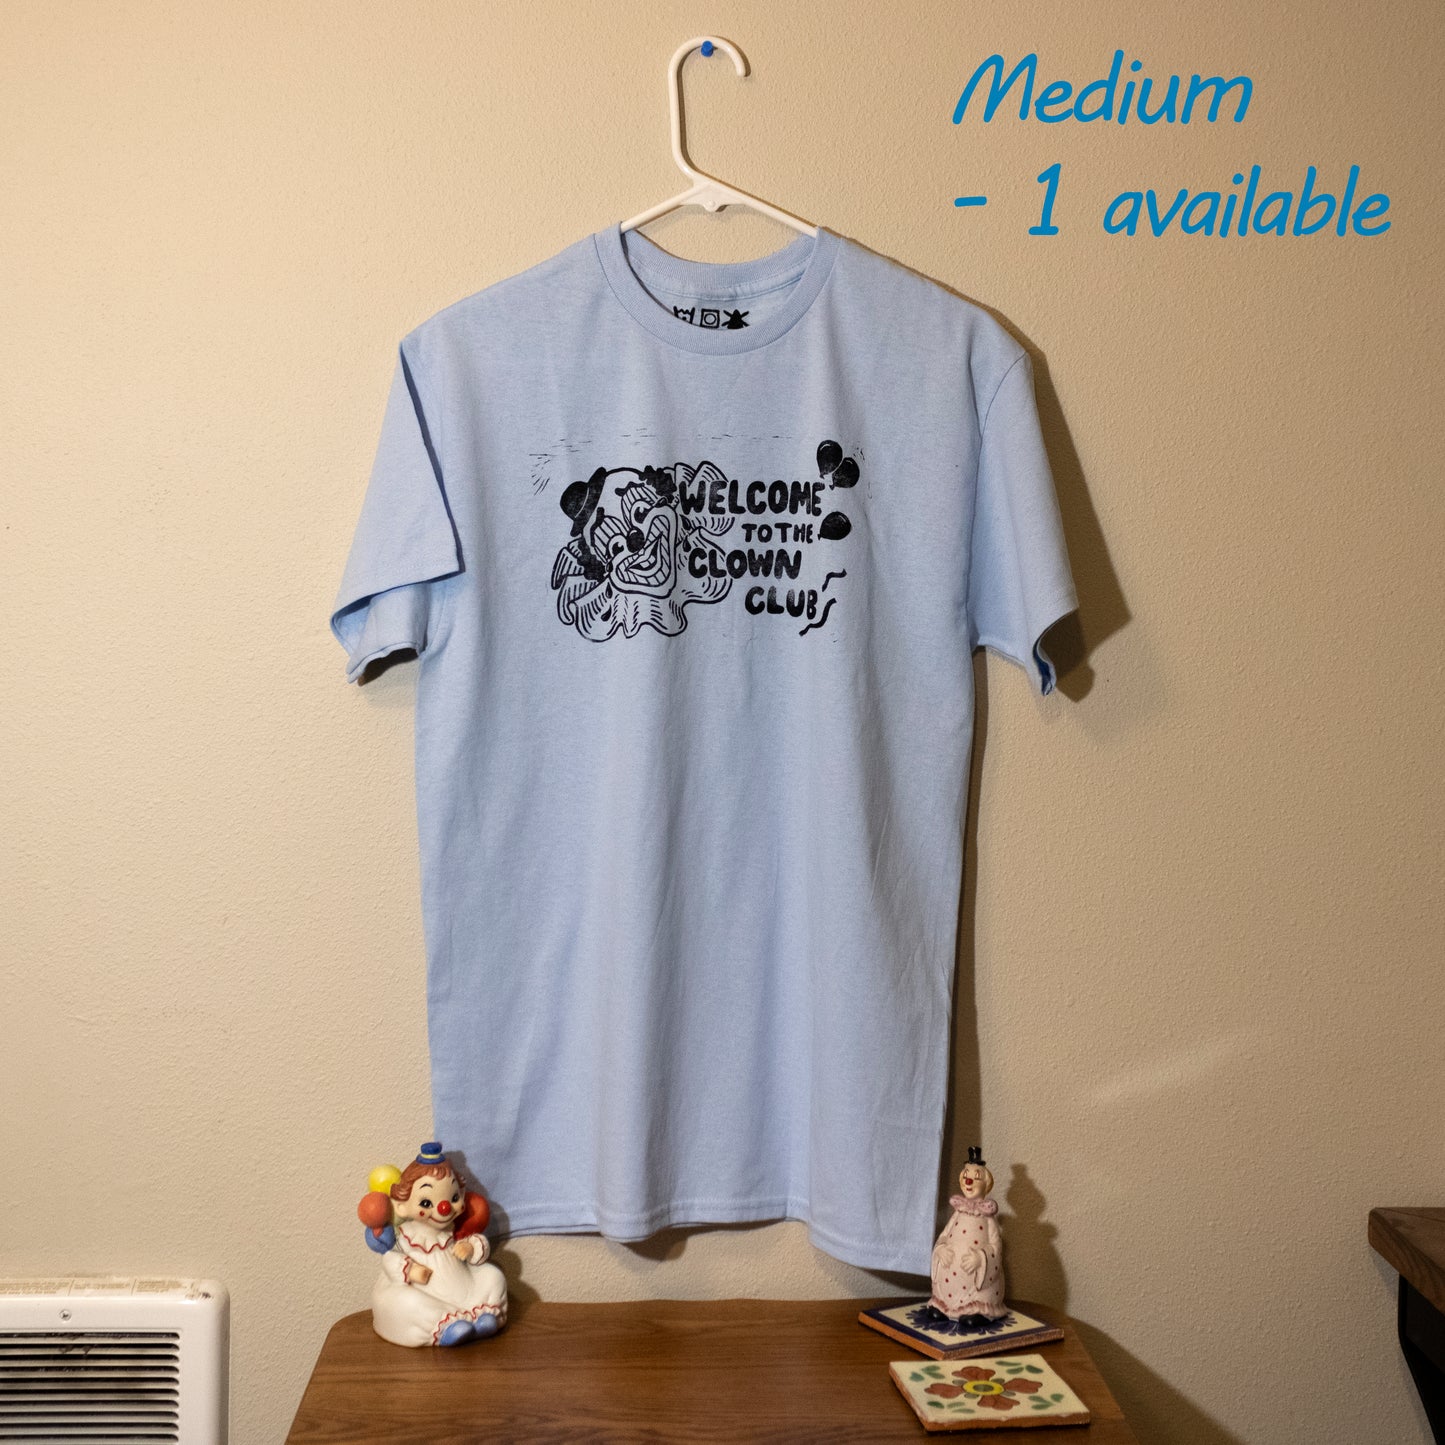 Jaiden Haley - "Welcome To The Clown Club" T-shirt